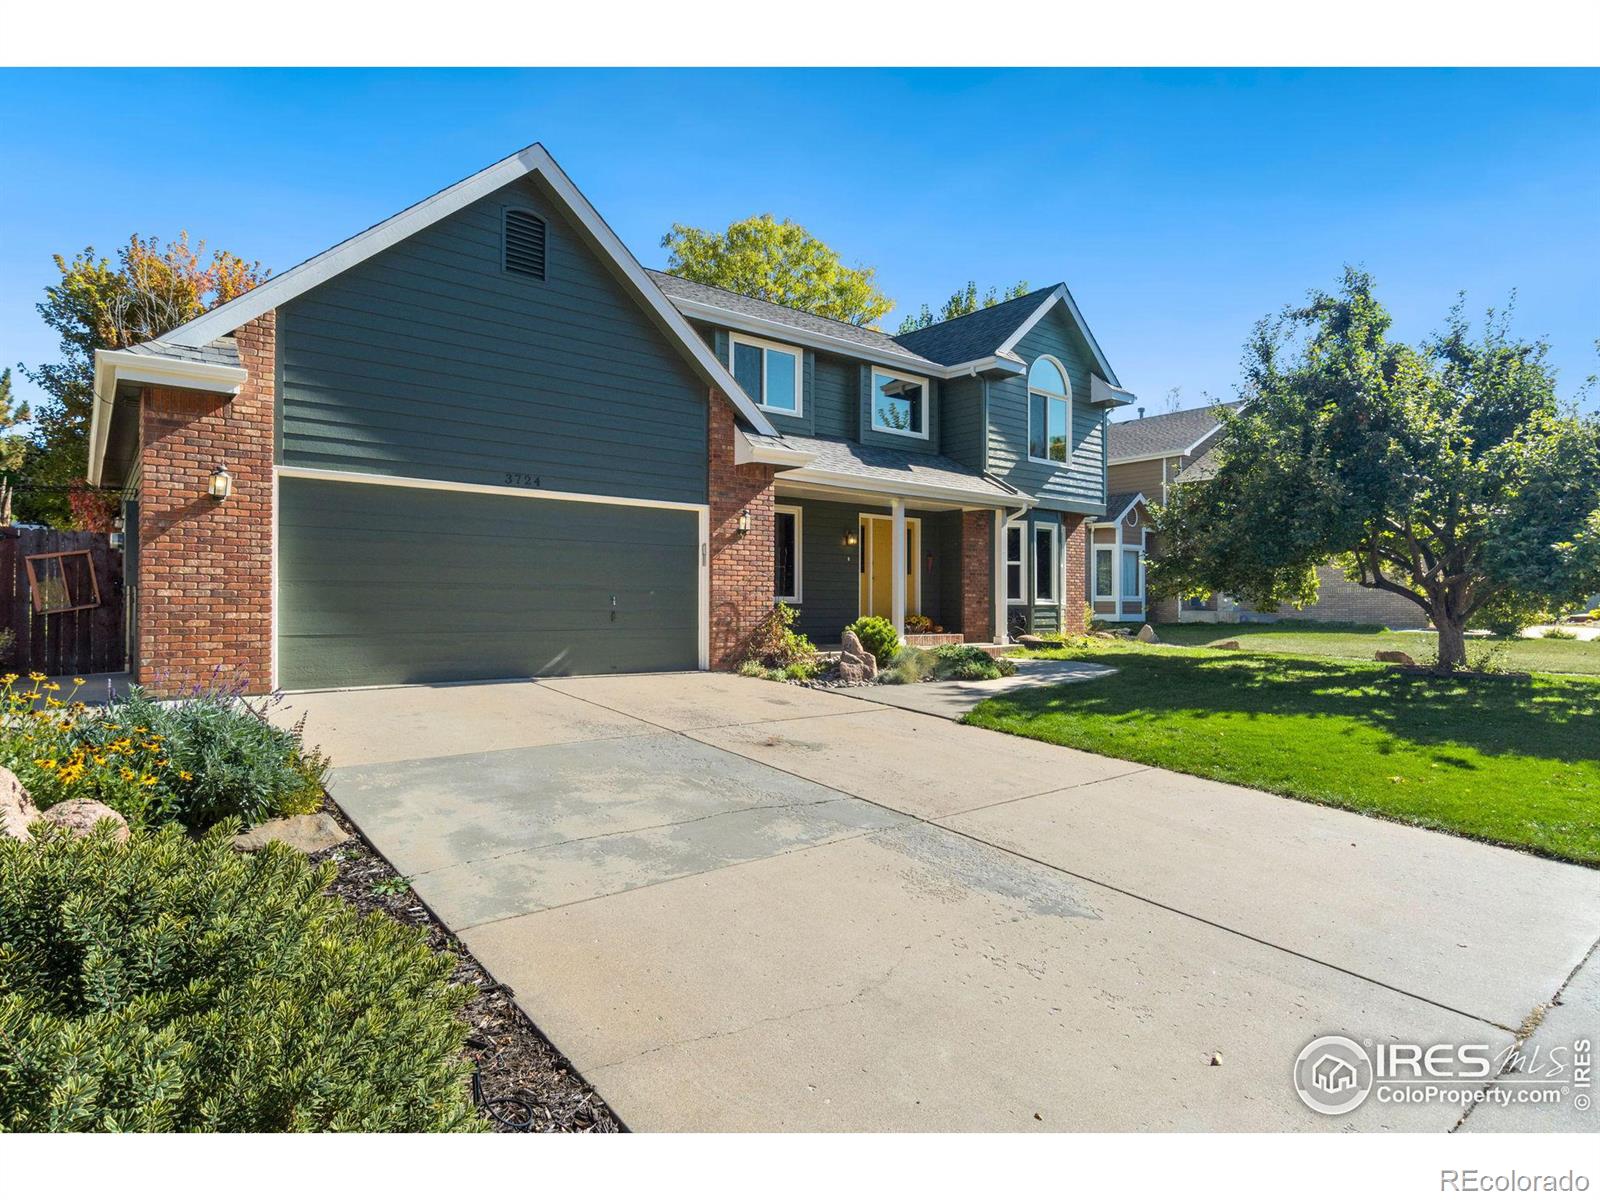 Report Image for 3724  Ashmount Drive,Fort Collins, Colorado